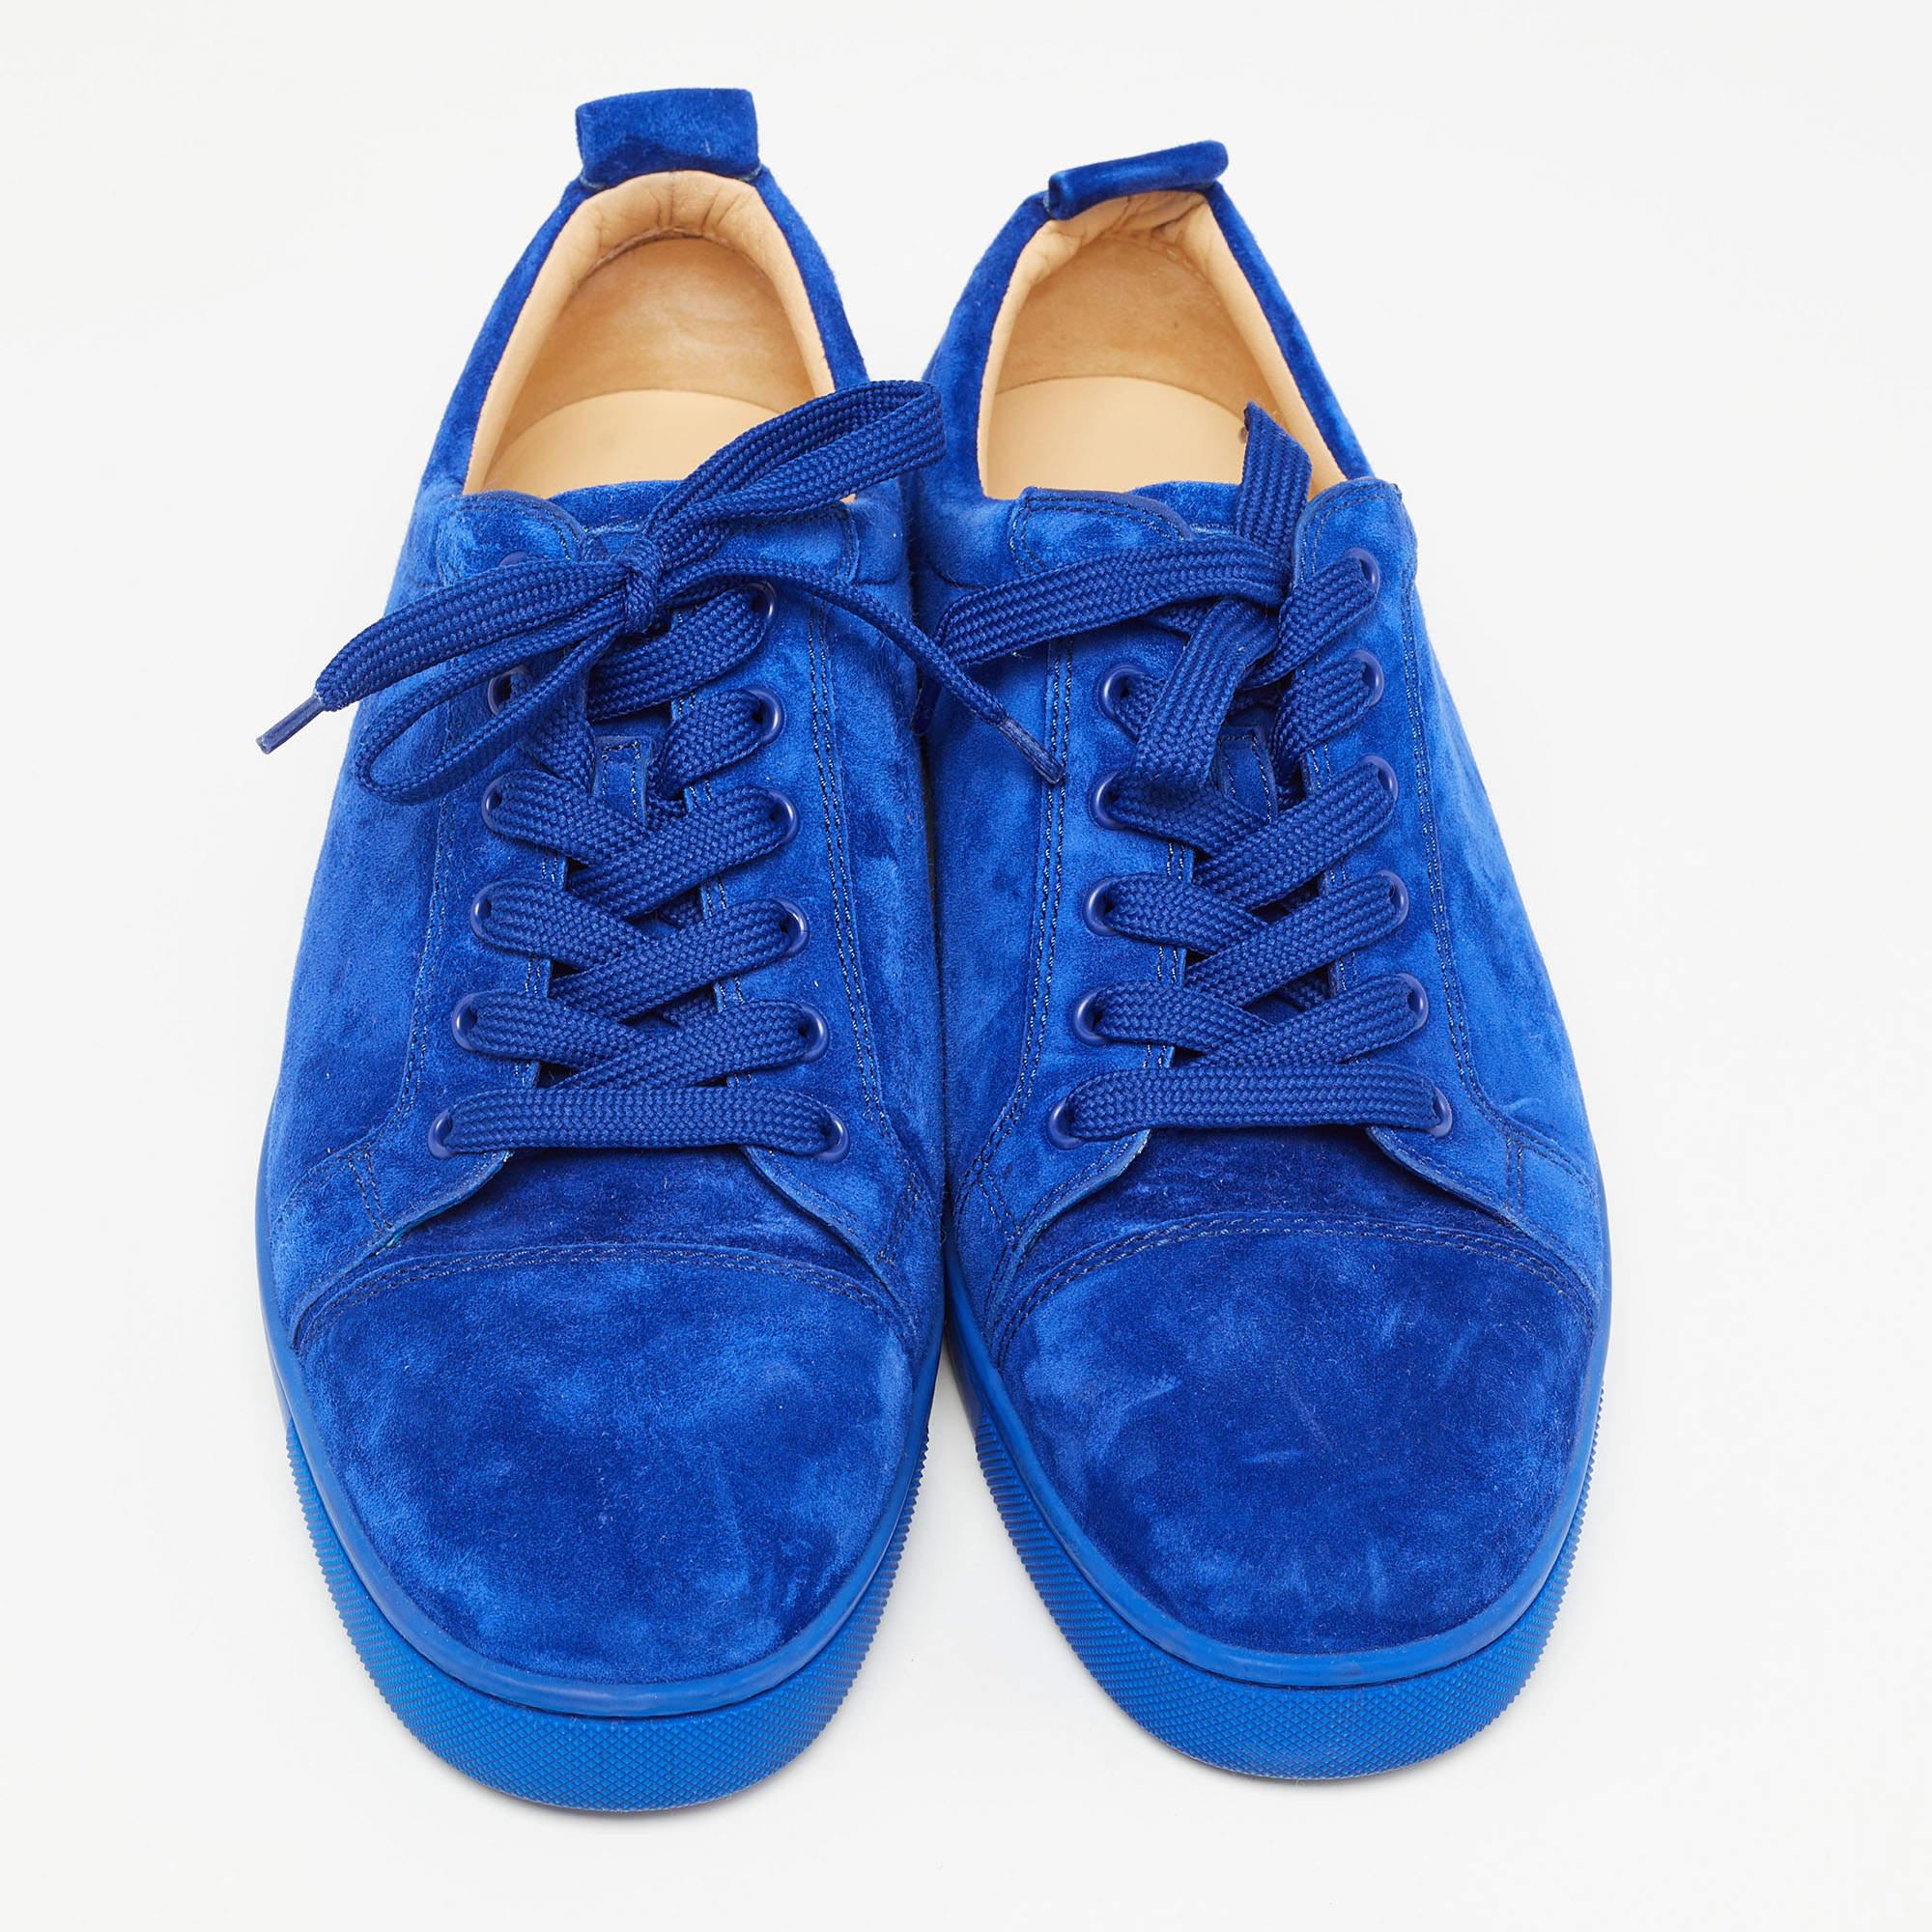 Christian Louboutin Blue Suede Leather Low Top Sneakers Size 42.5 In Excellent Condition For Sale In Dubai, Al Qouz 2